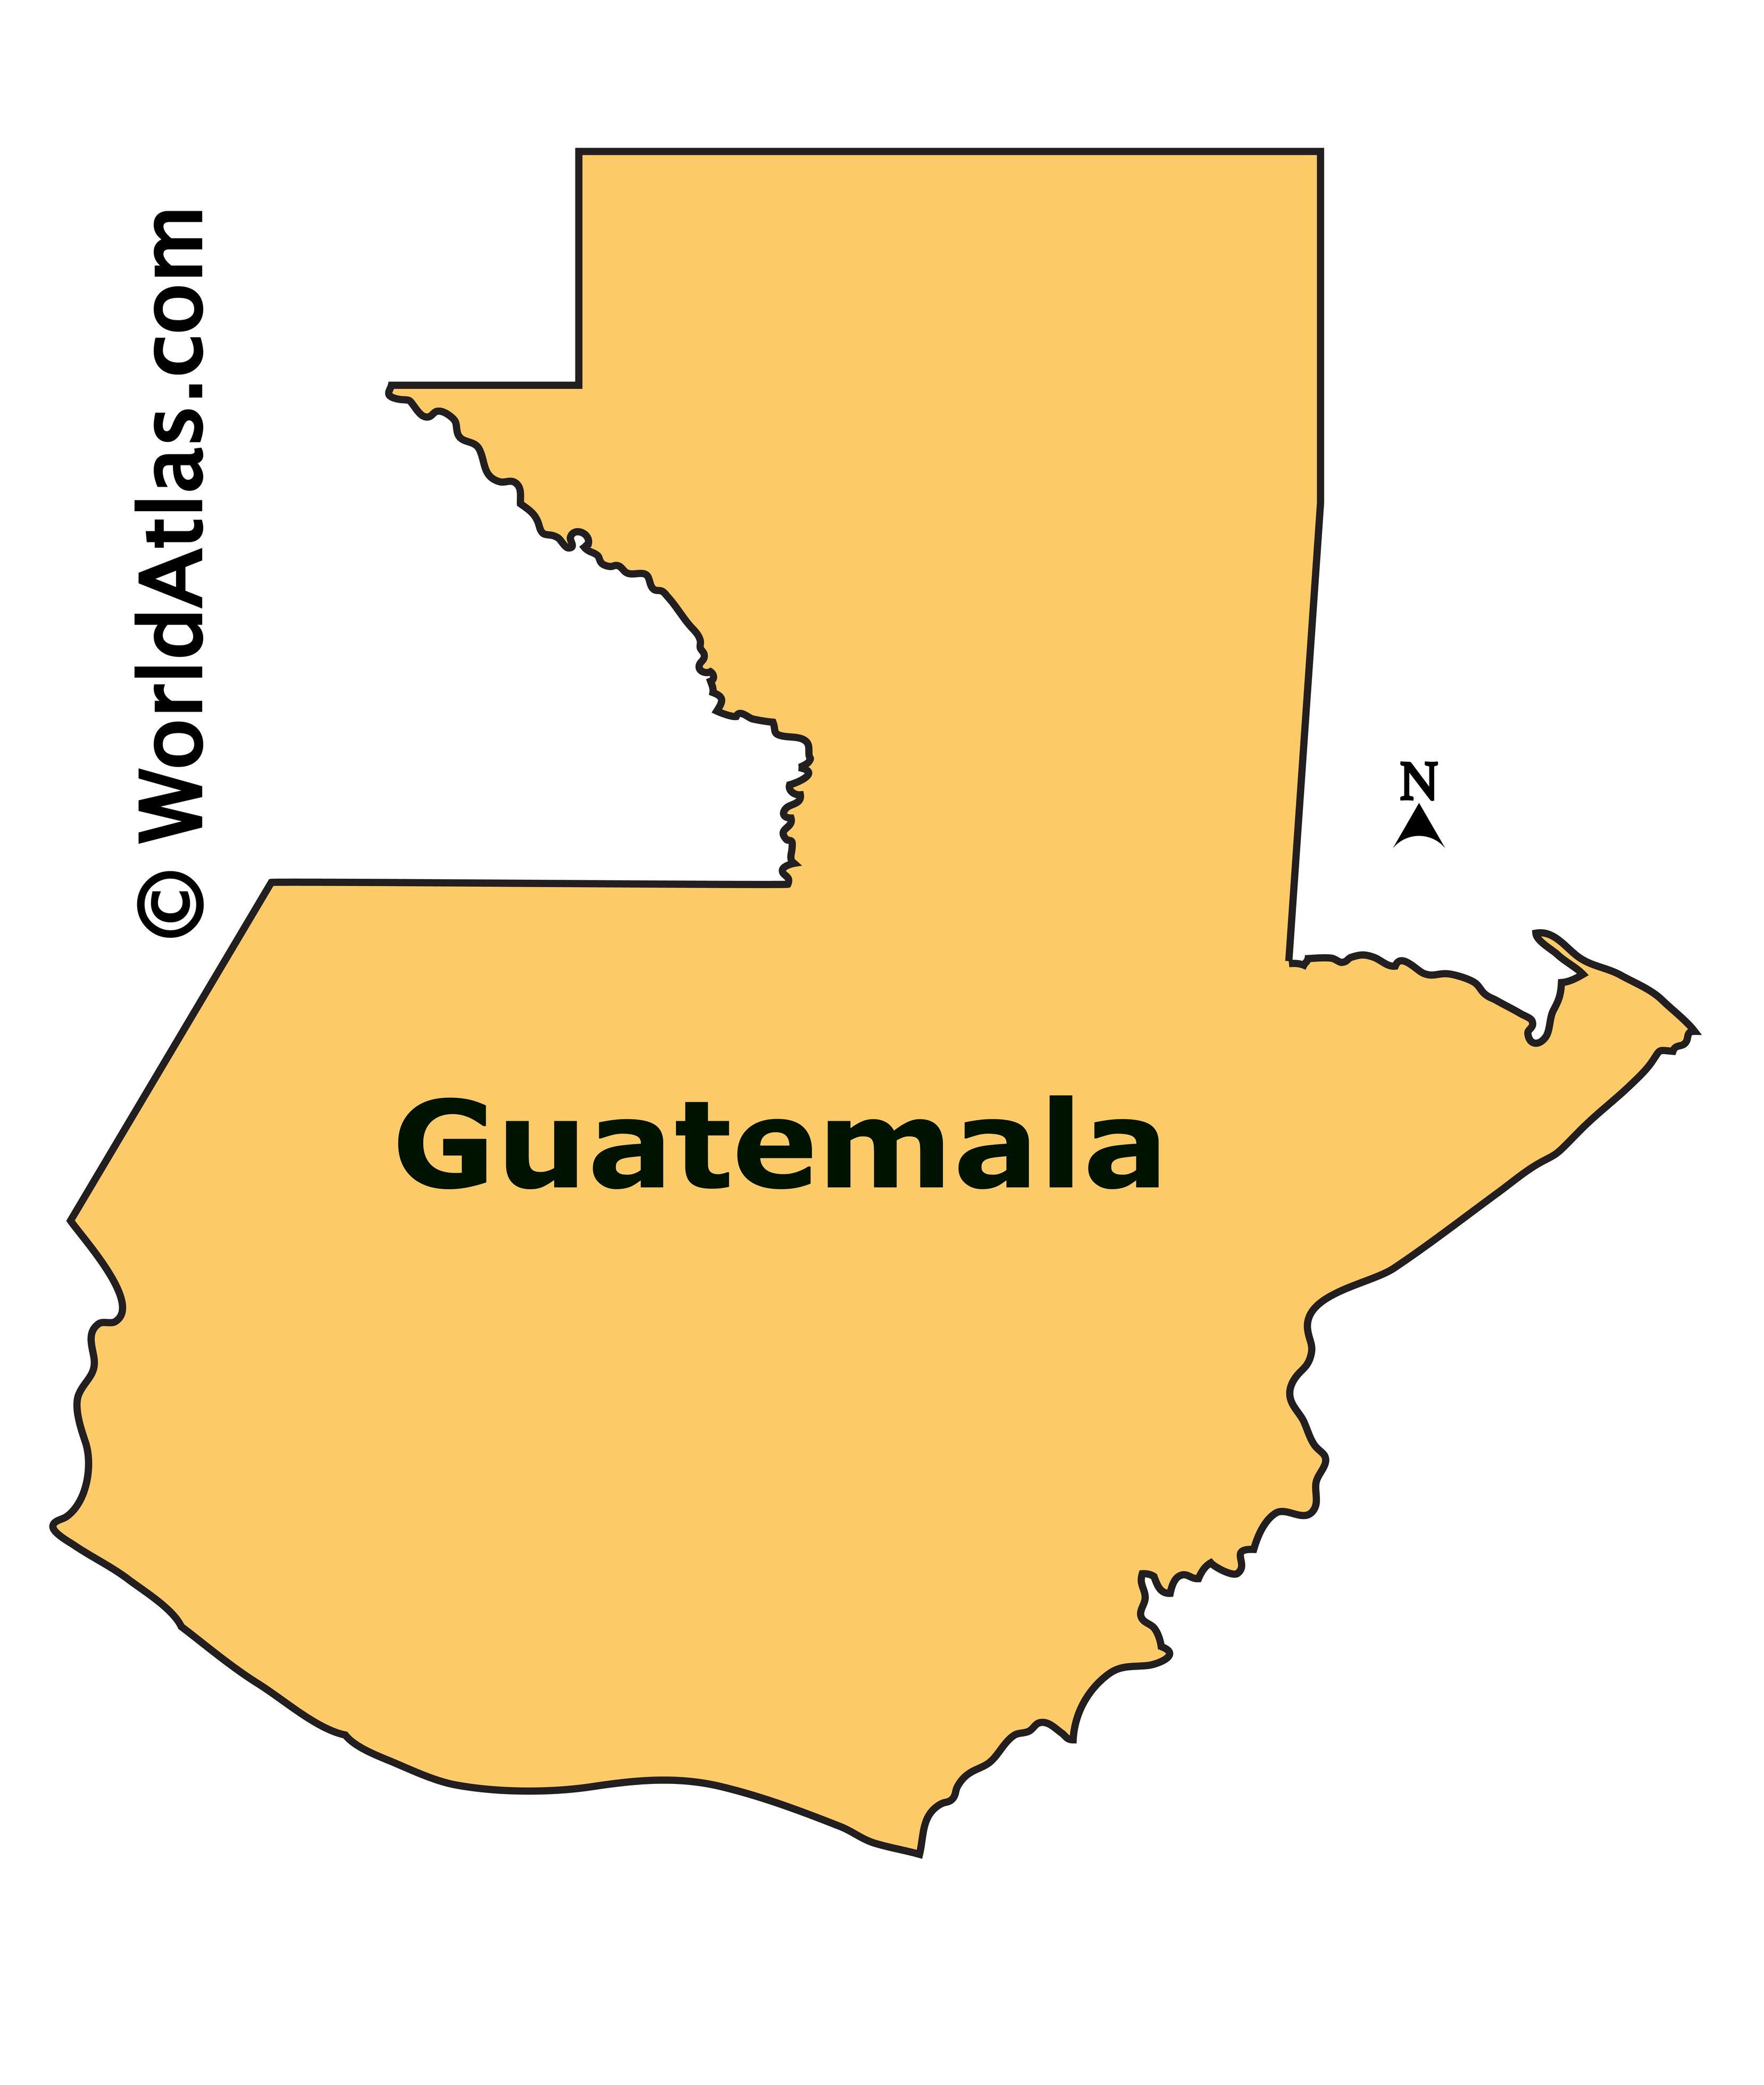 The above outline map represents Guatemala, a mountainous country in Centra...